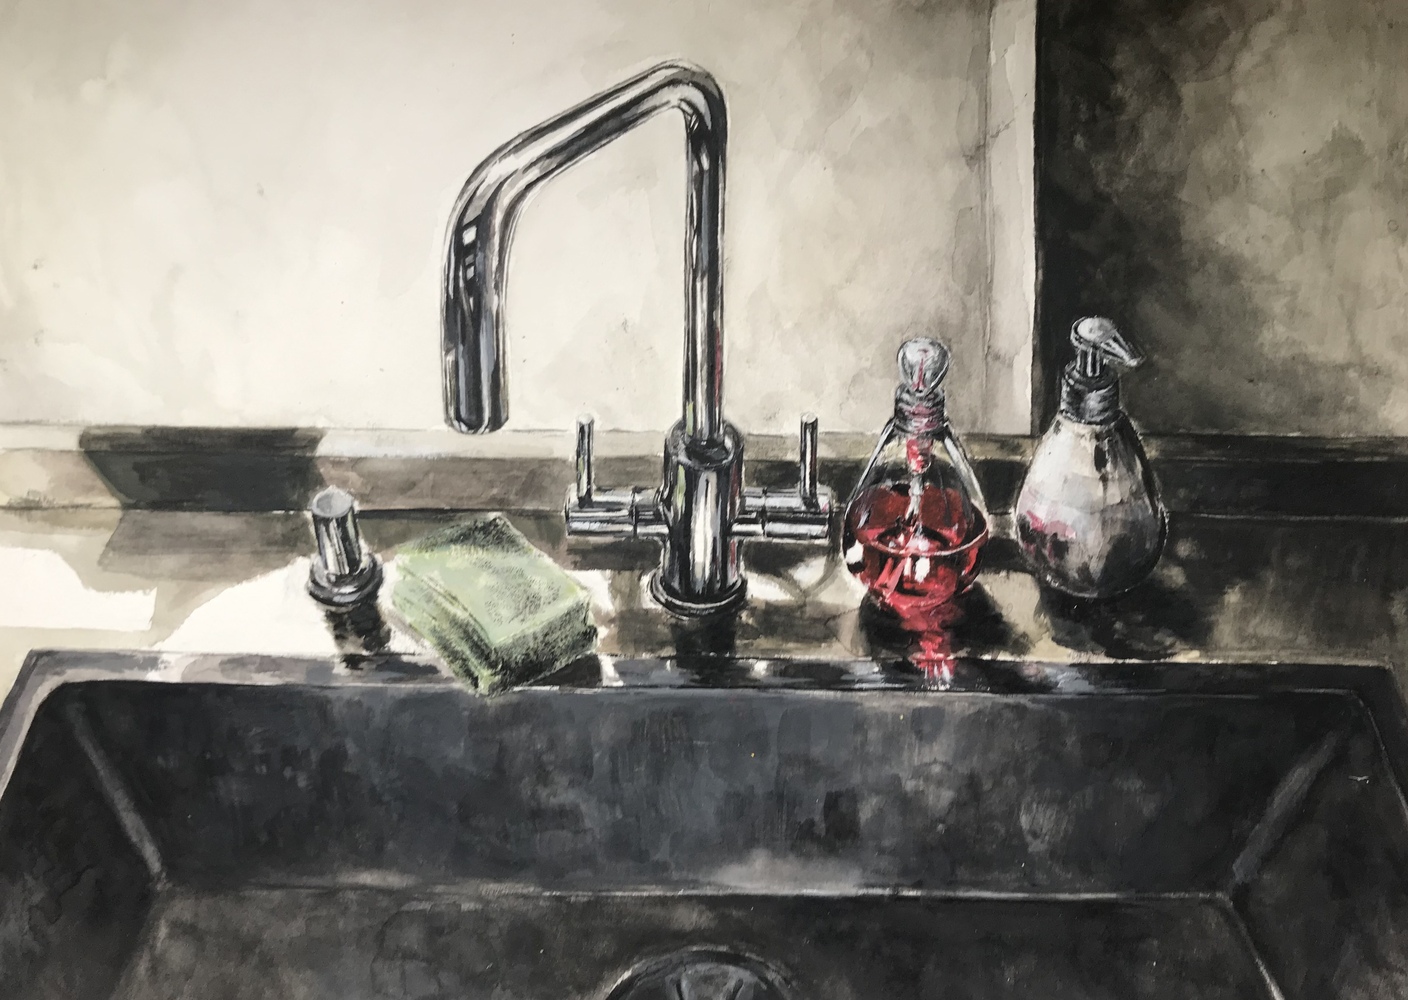 Painting of kitchen sink